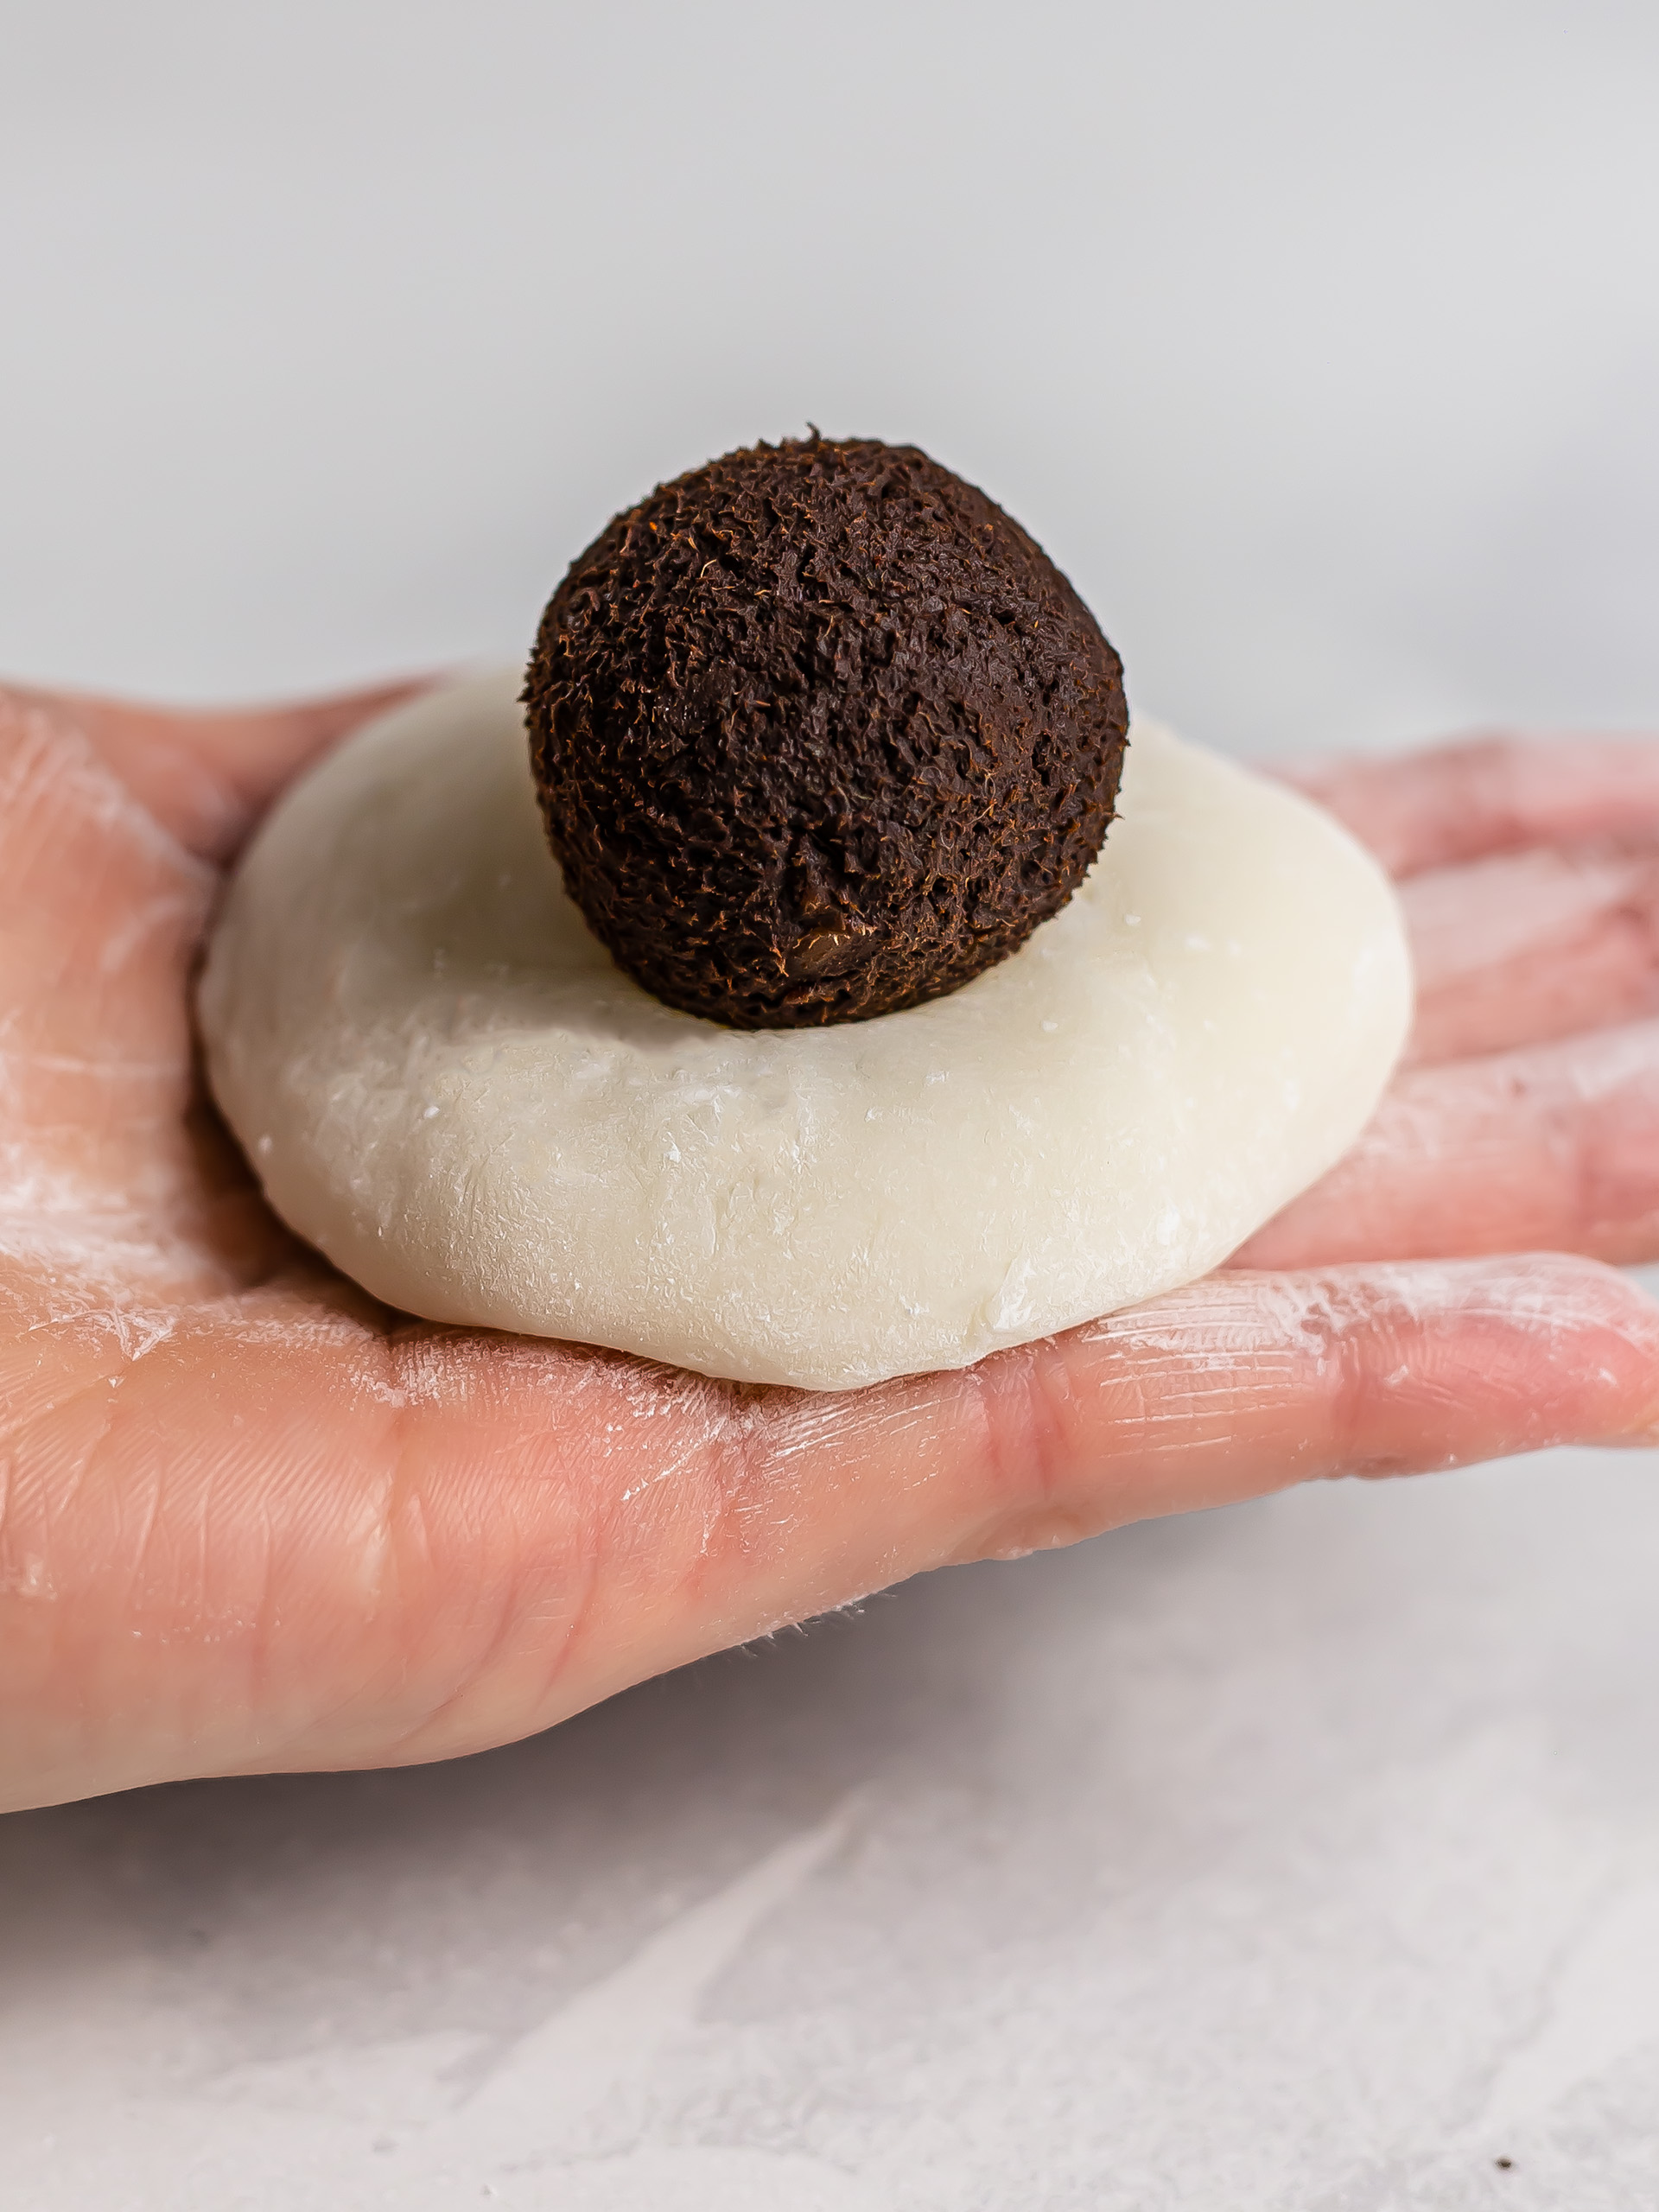 mochi dough wrapper with chocolate filling ball